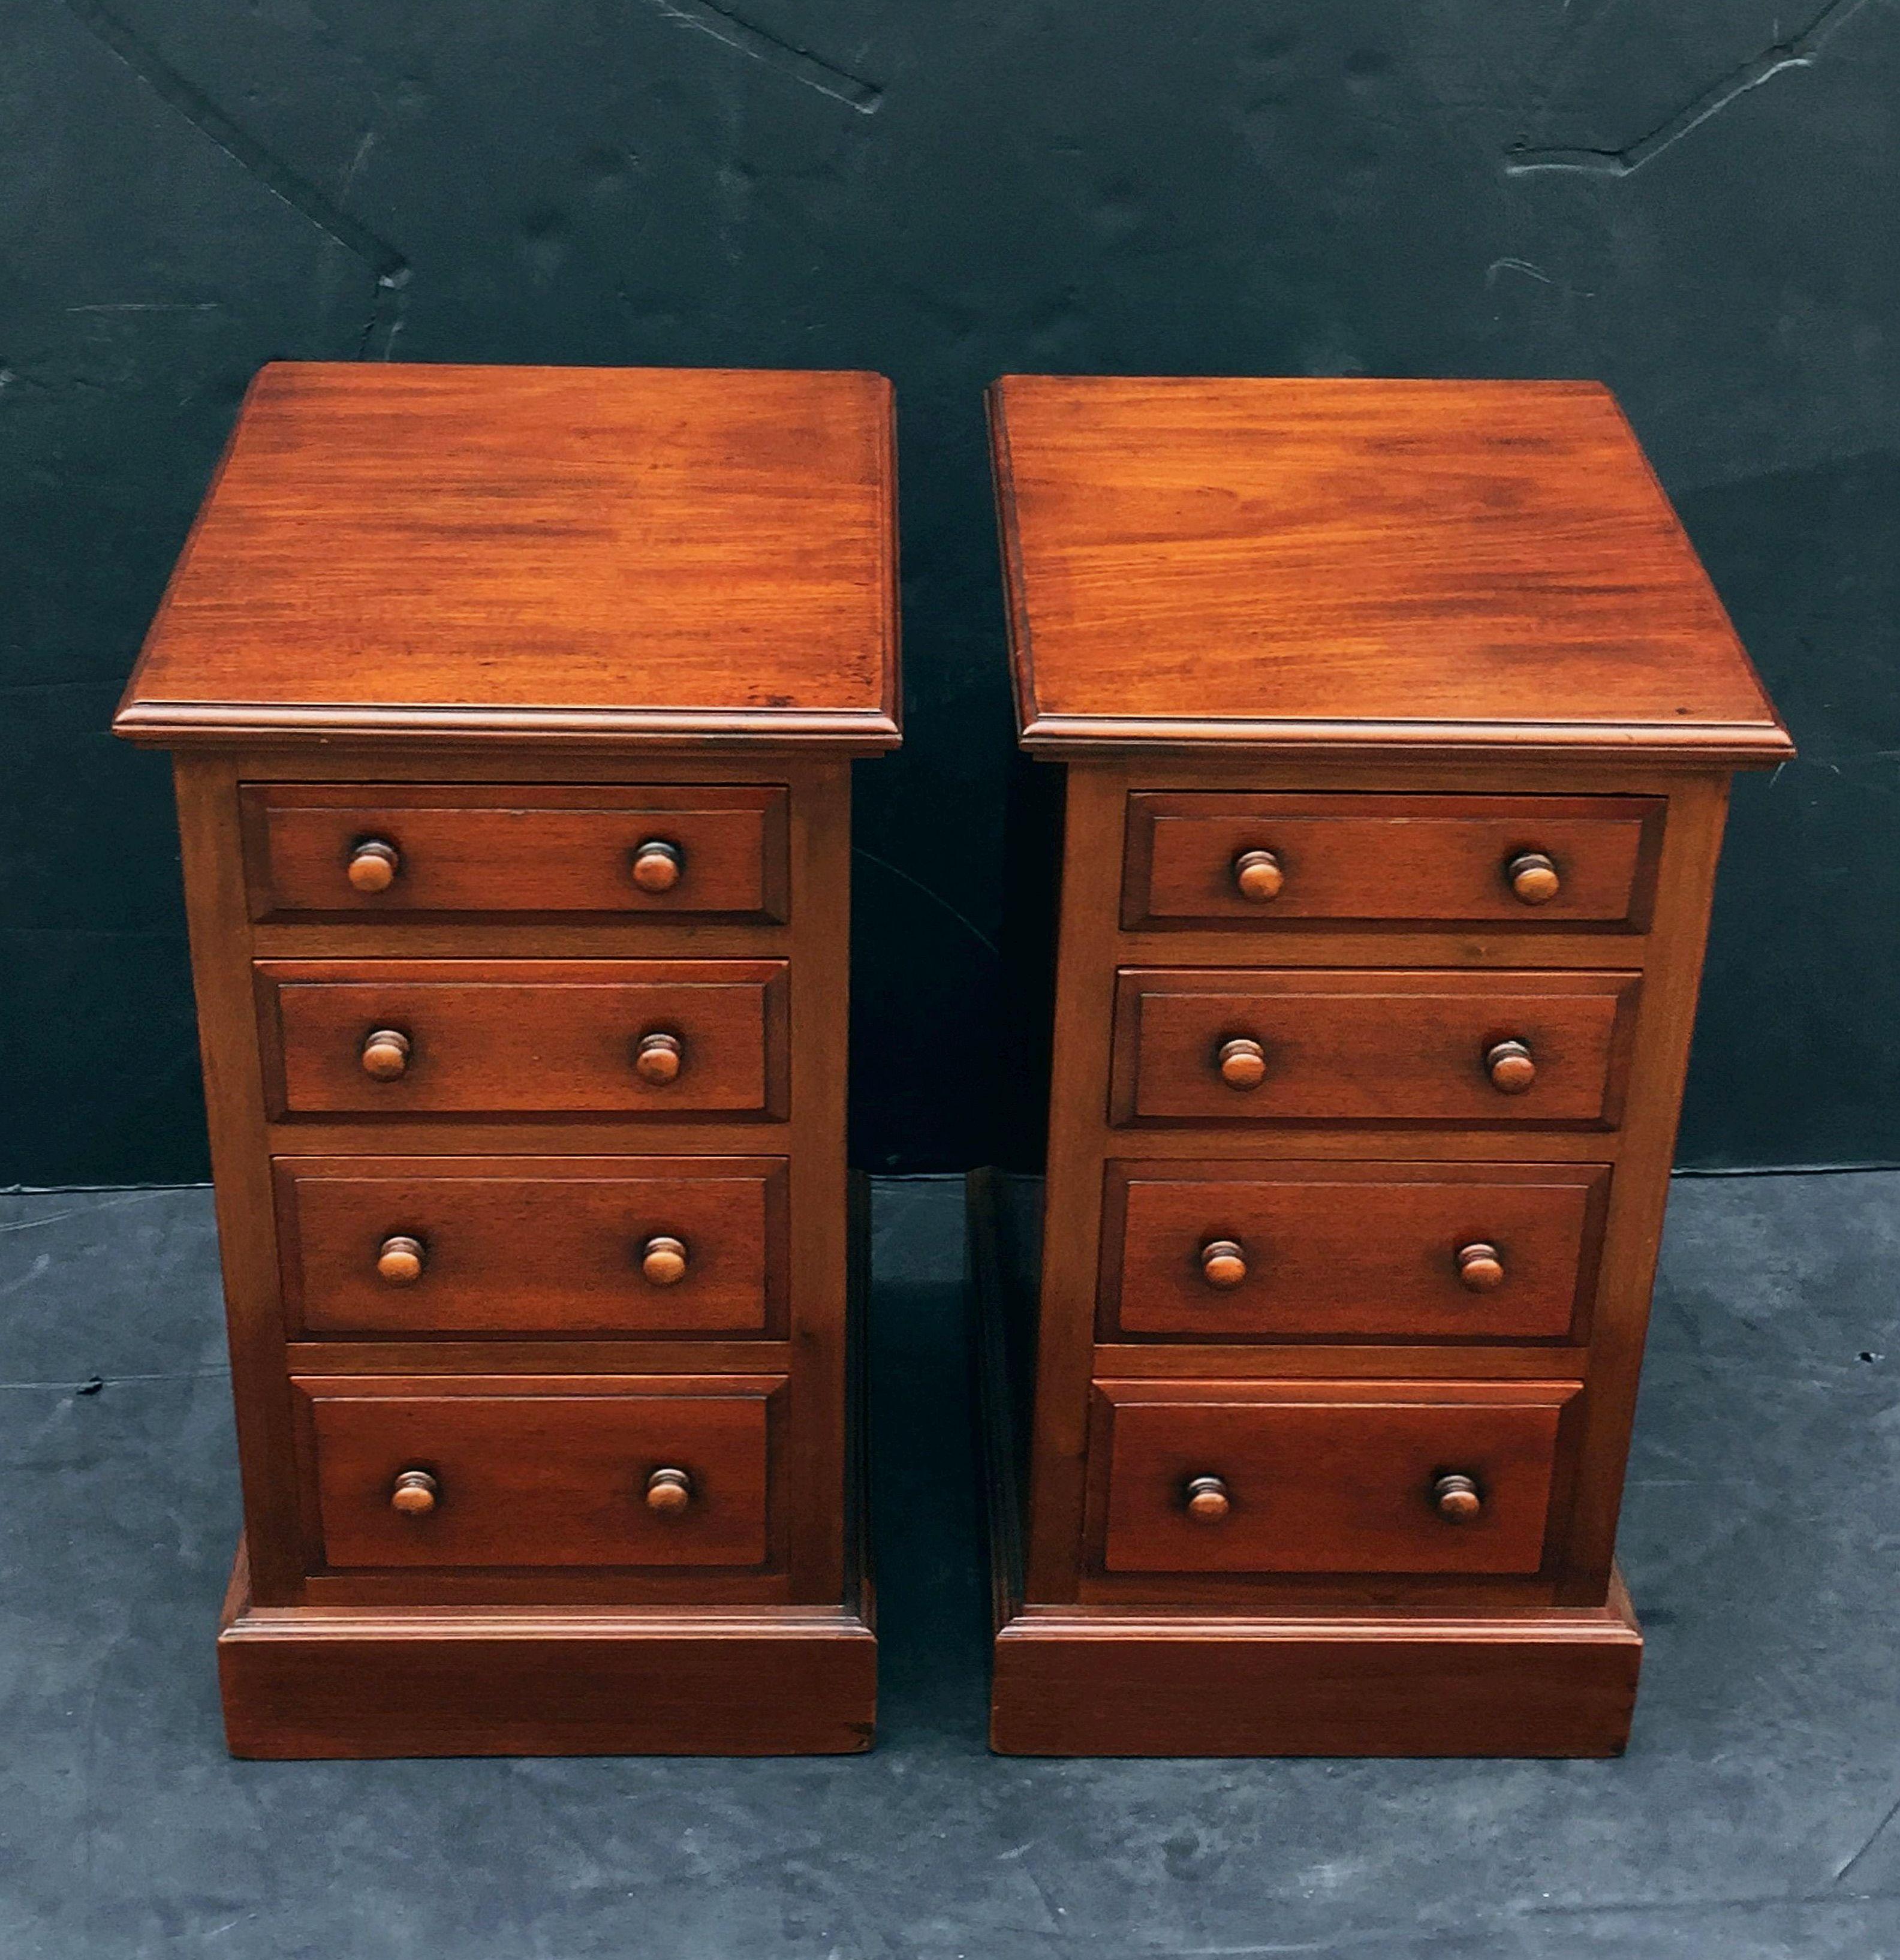 English Bedside Chests or Cabinet Nightstands of Mahogany - 'Priced as a Pair' 1